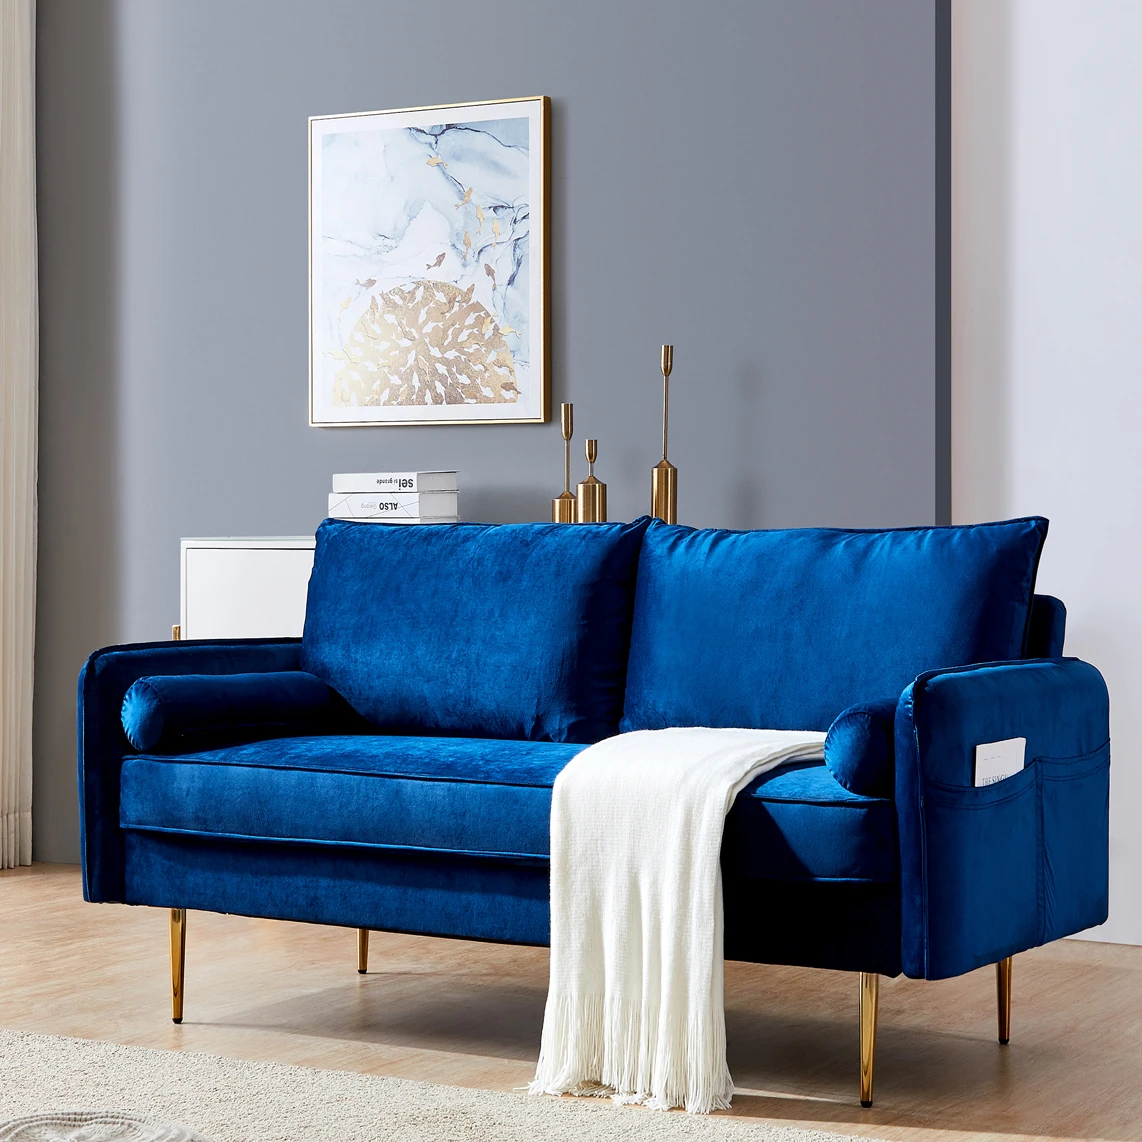 

Soft Tufted Velvet Upholstered Sectional Sofa Chaise, 4 Seater Couch with 2 Lumbar Pillows for Living Room, Blue